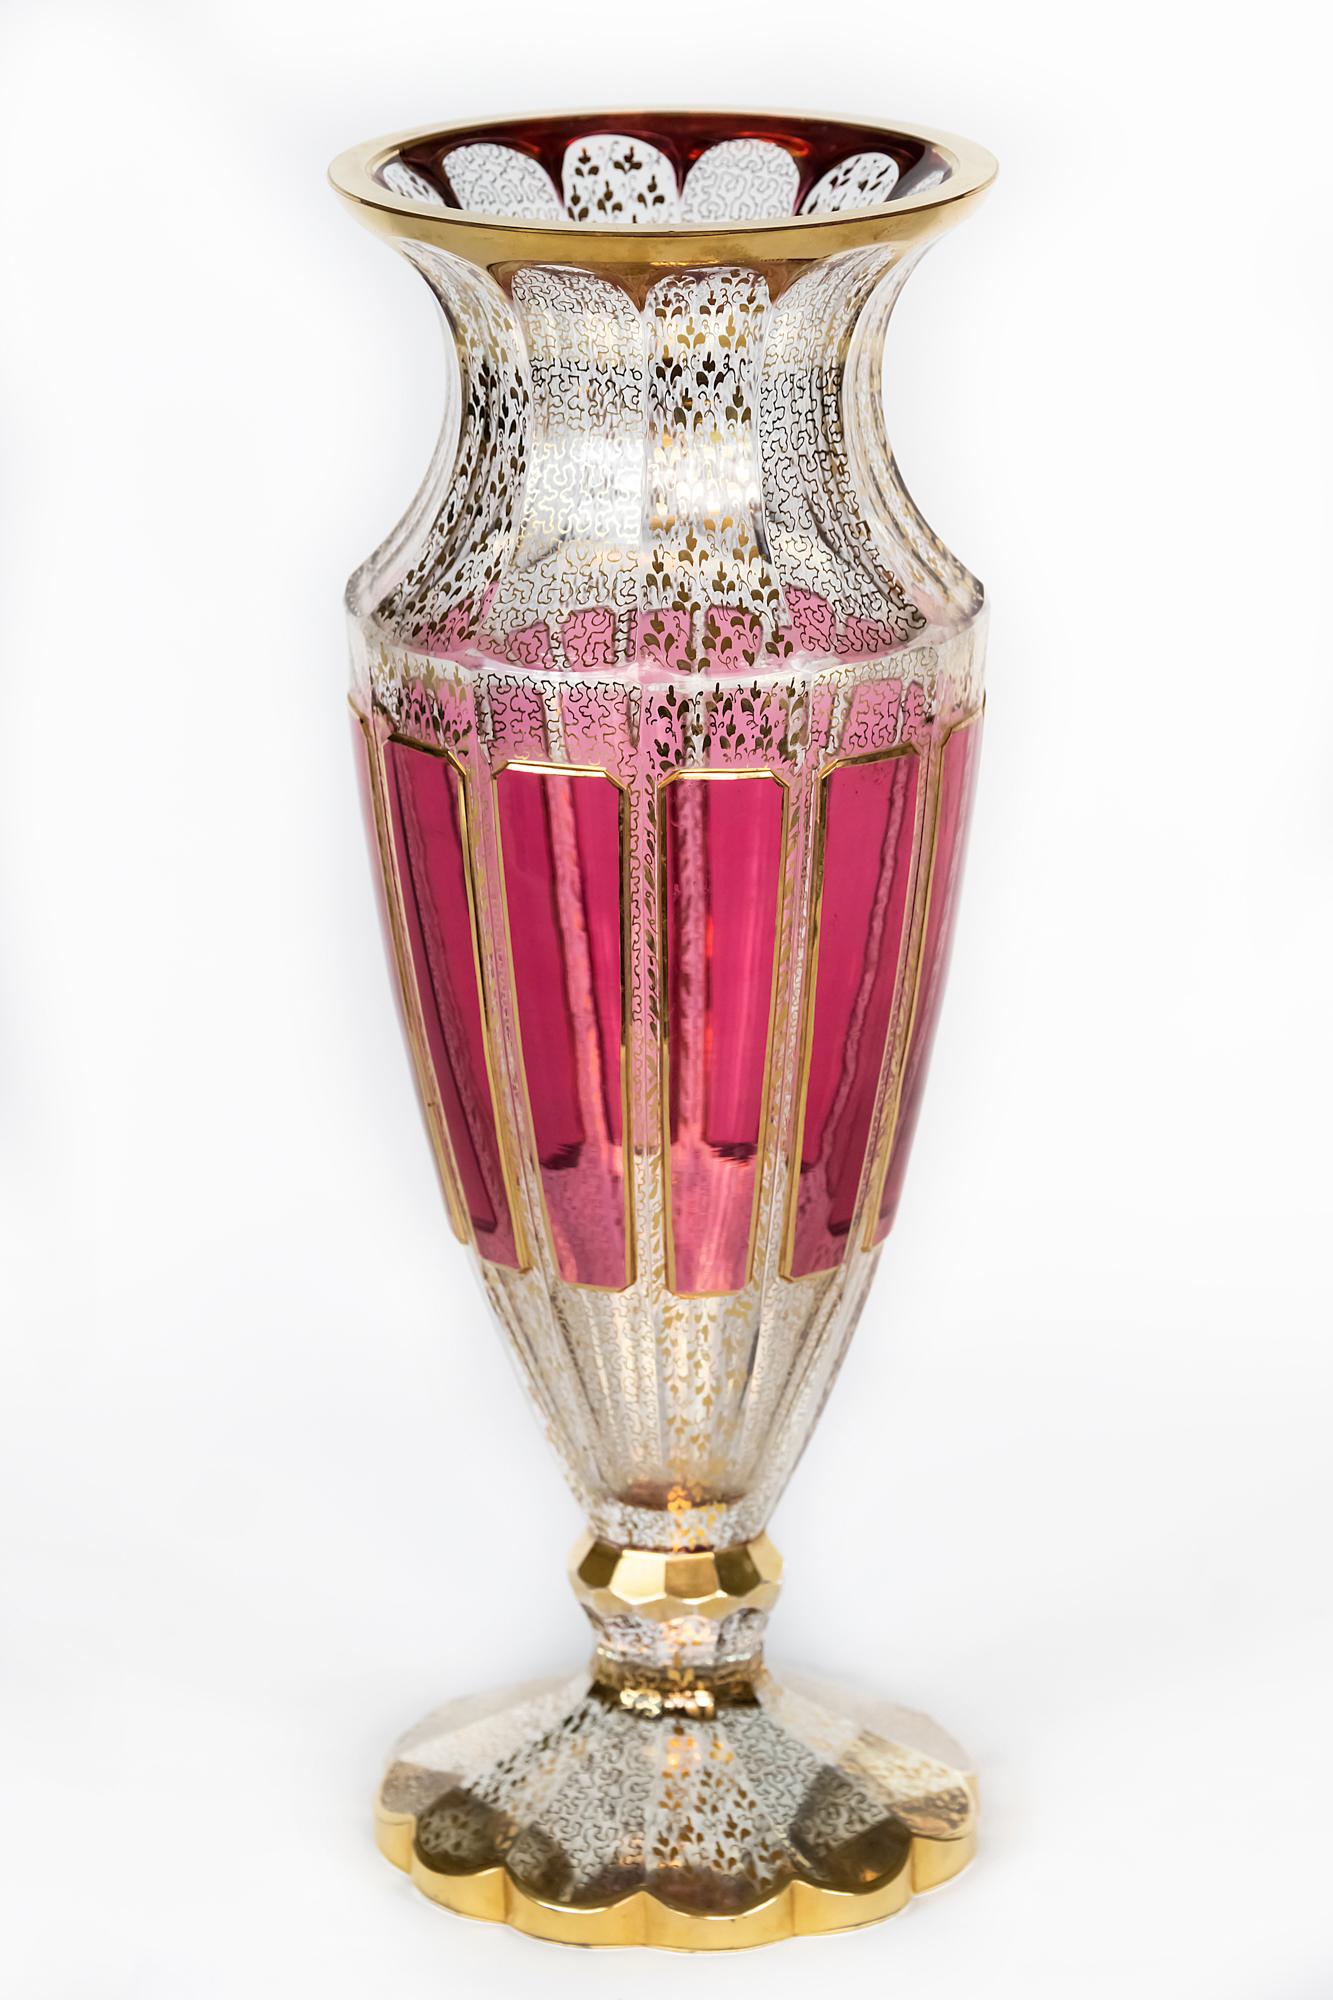 Bohemian transparent glass vase decorated with raspberry colour glass, gilt trims and gold pattern through the glass.
The vase is heavy and in a very good antique condition.